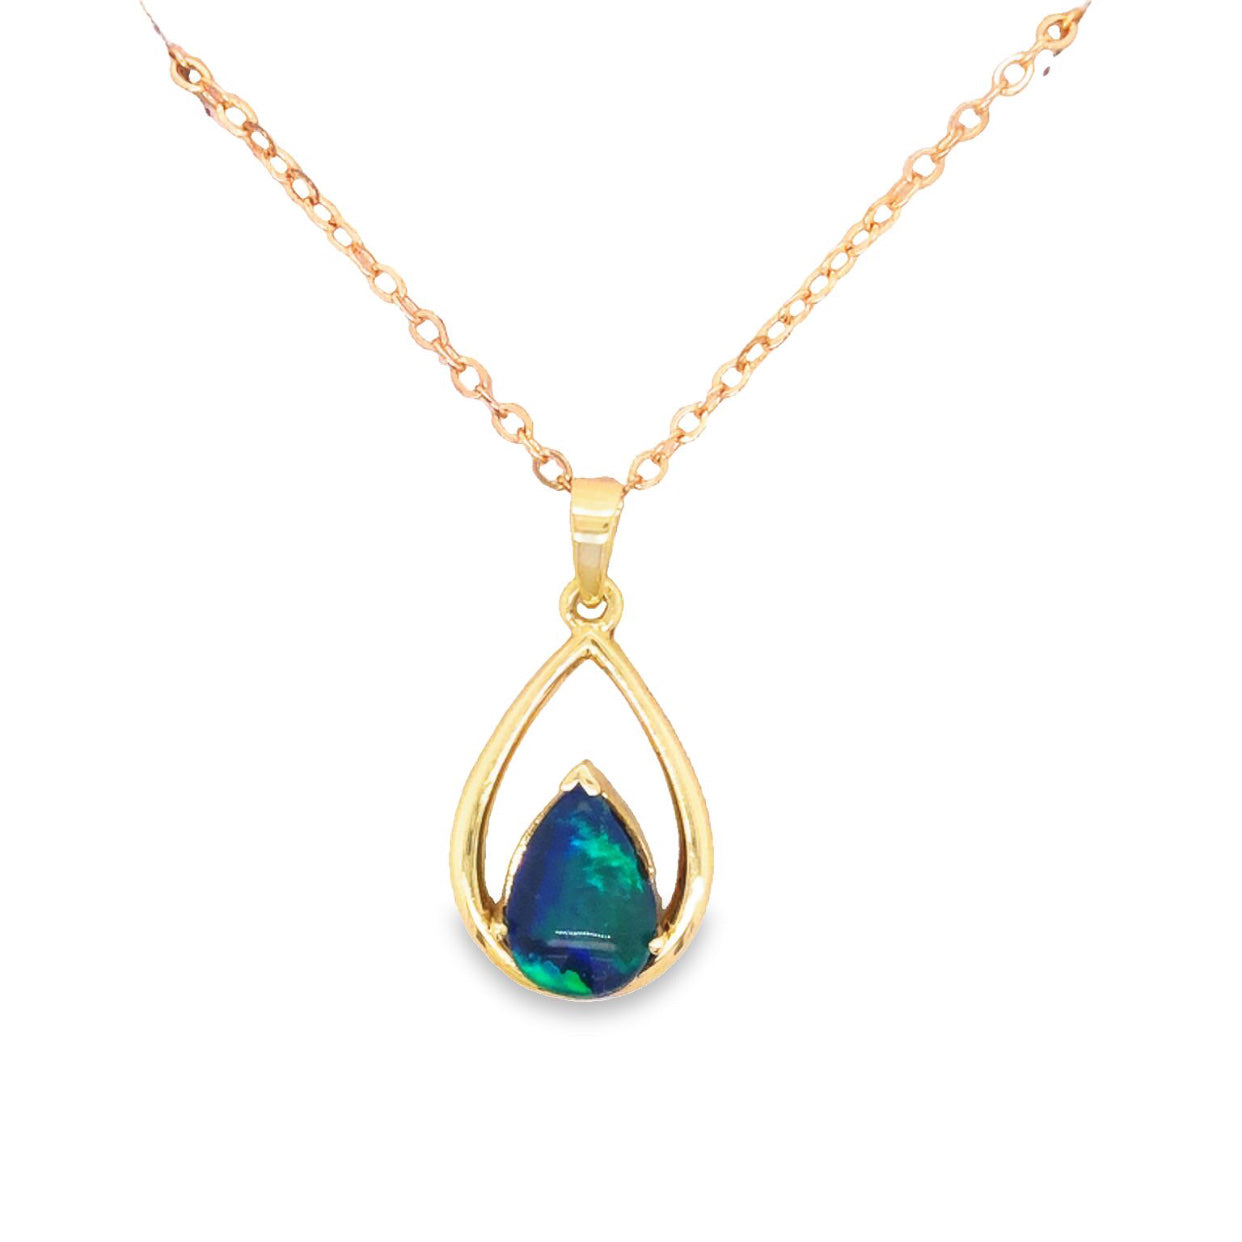 9Ct Yellow Gold Pear Shaped Triplet Red/Blue/Green Opal Open Wire Pendant 10 X 7Mm,